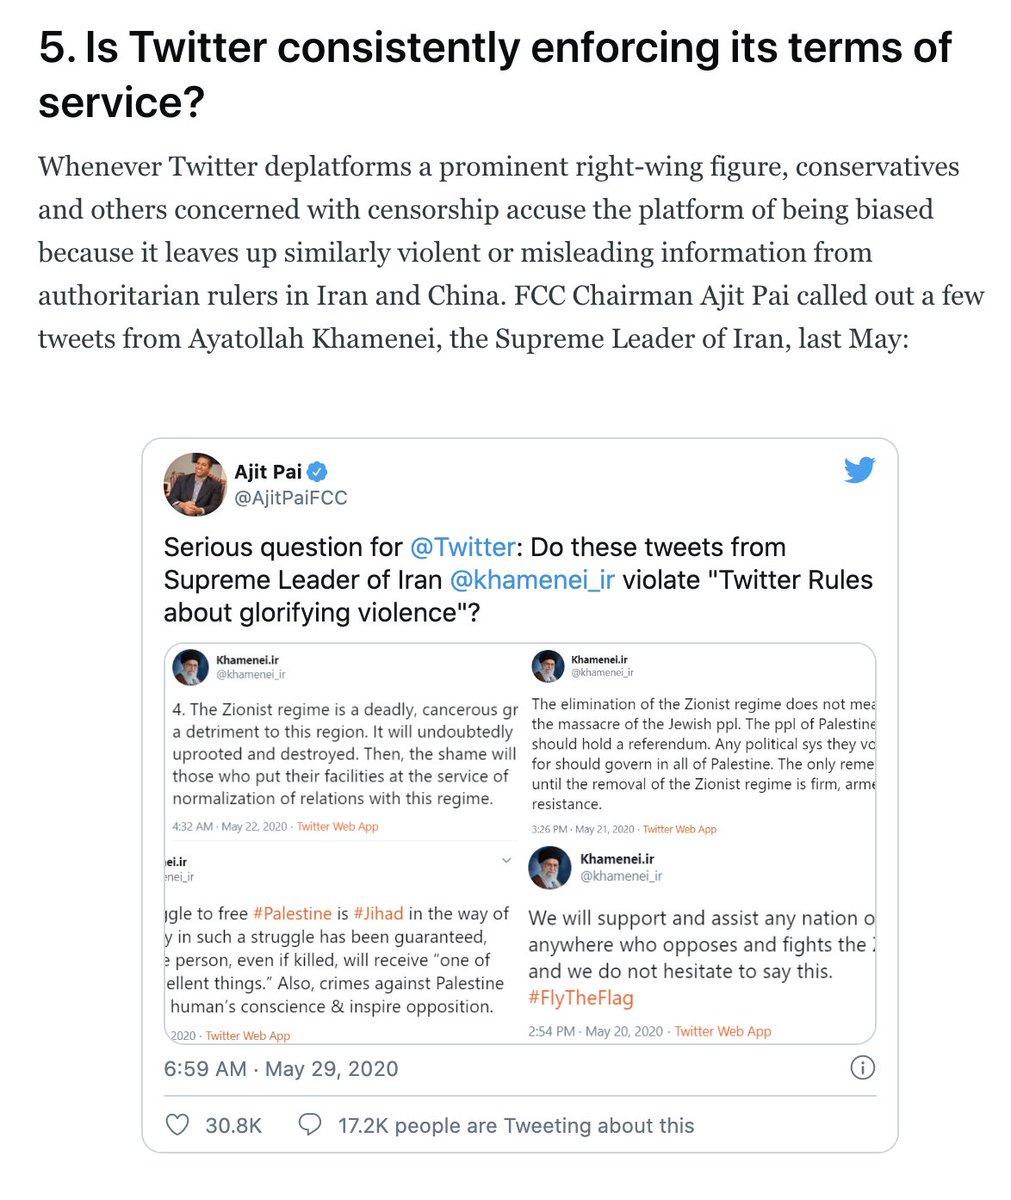 5. Those who say that Twitter is being inconsistent in enforcing its policies are right!But that doesn’t mean Twitter should leave Trump and other extremists alone.Twitter should ban both Trump *and* the Supreme Leader of Iran from its platform (and CCP propaganda).